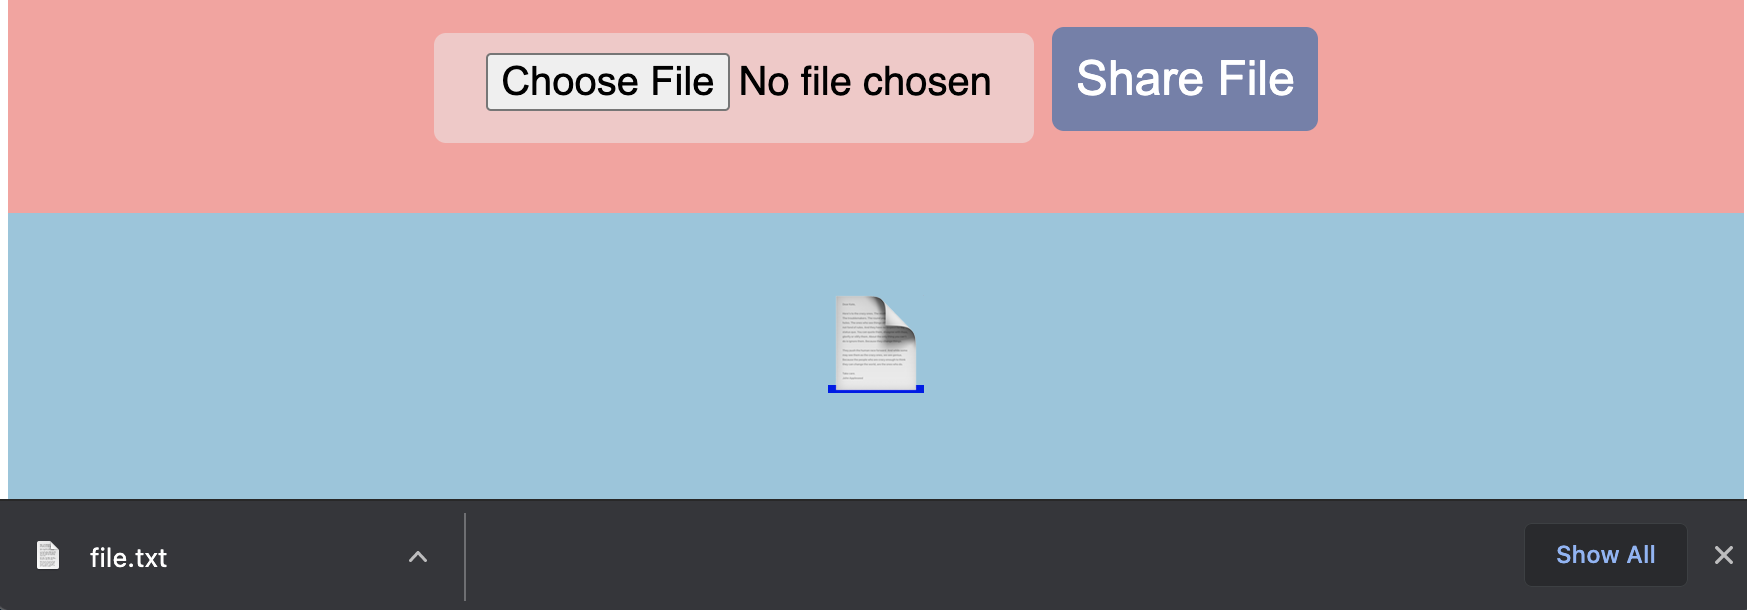 File emoji in blue "files" section at the bottom of the screen.